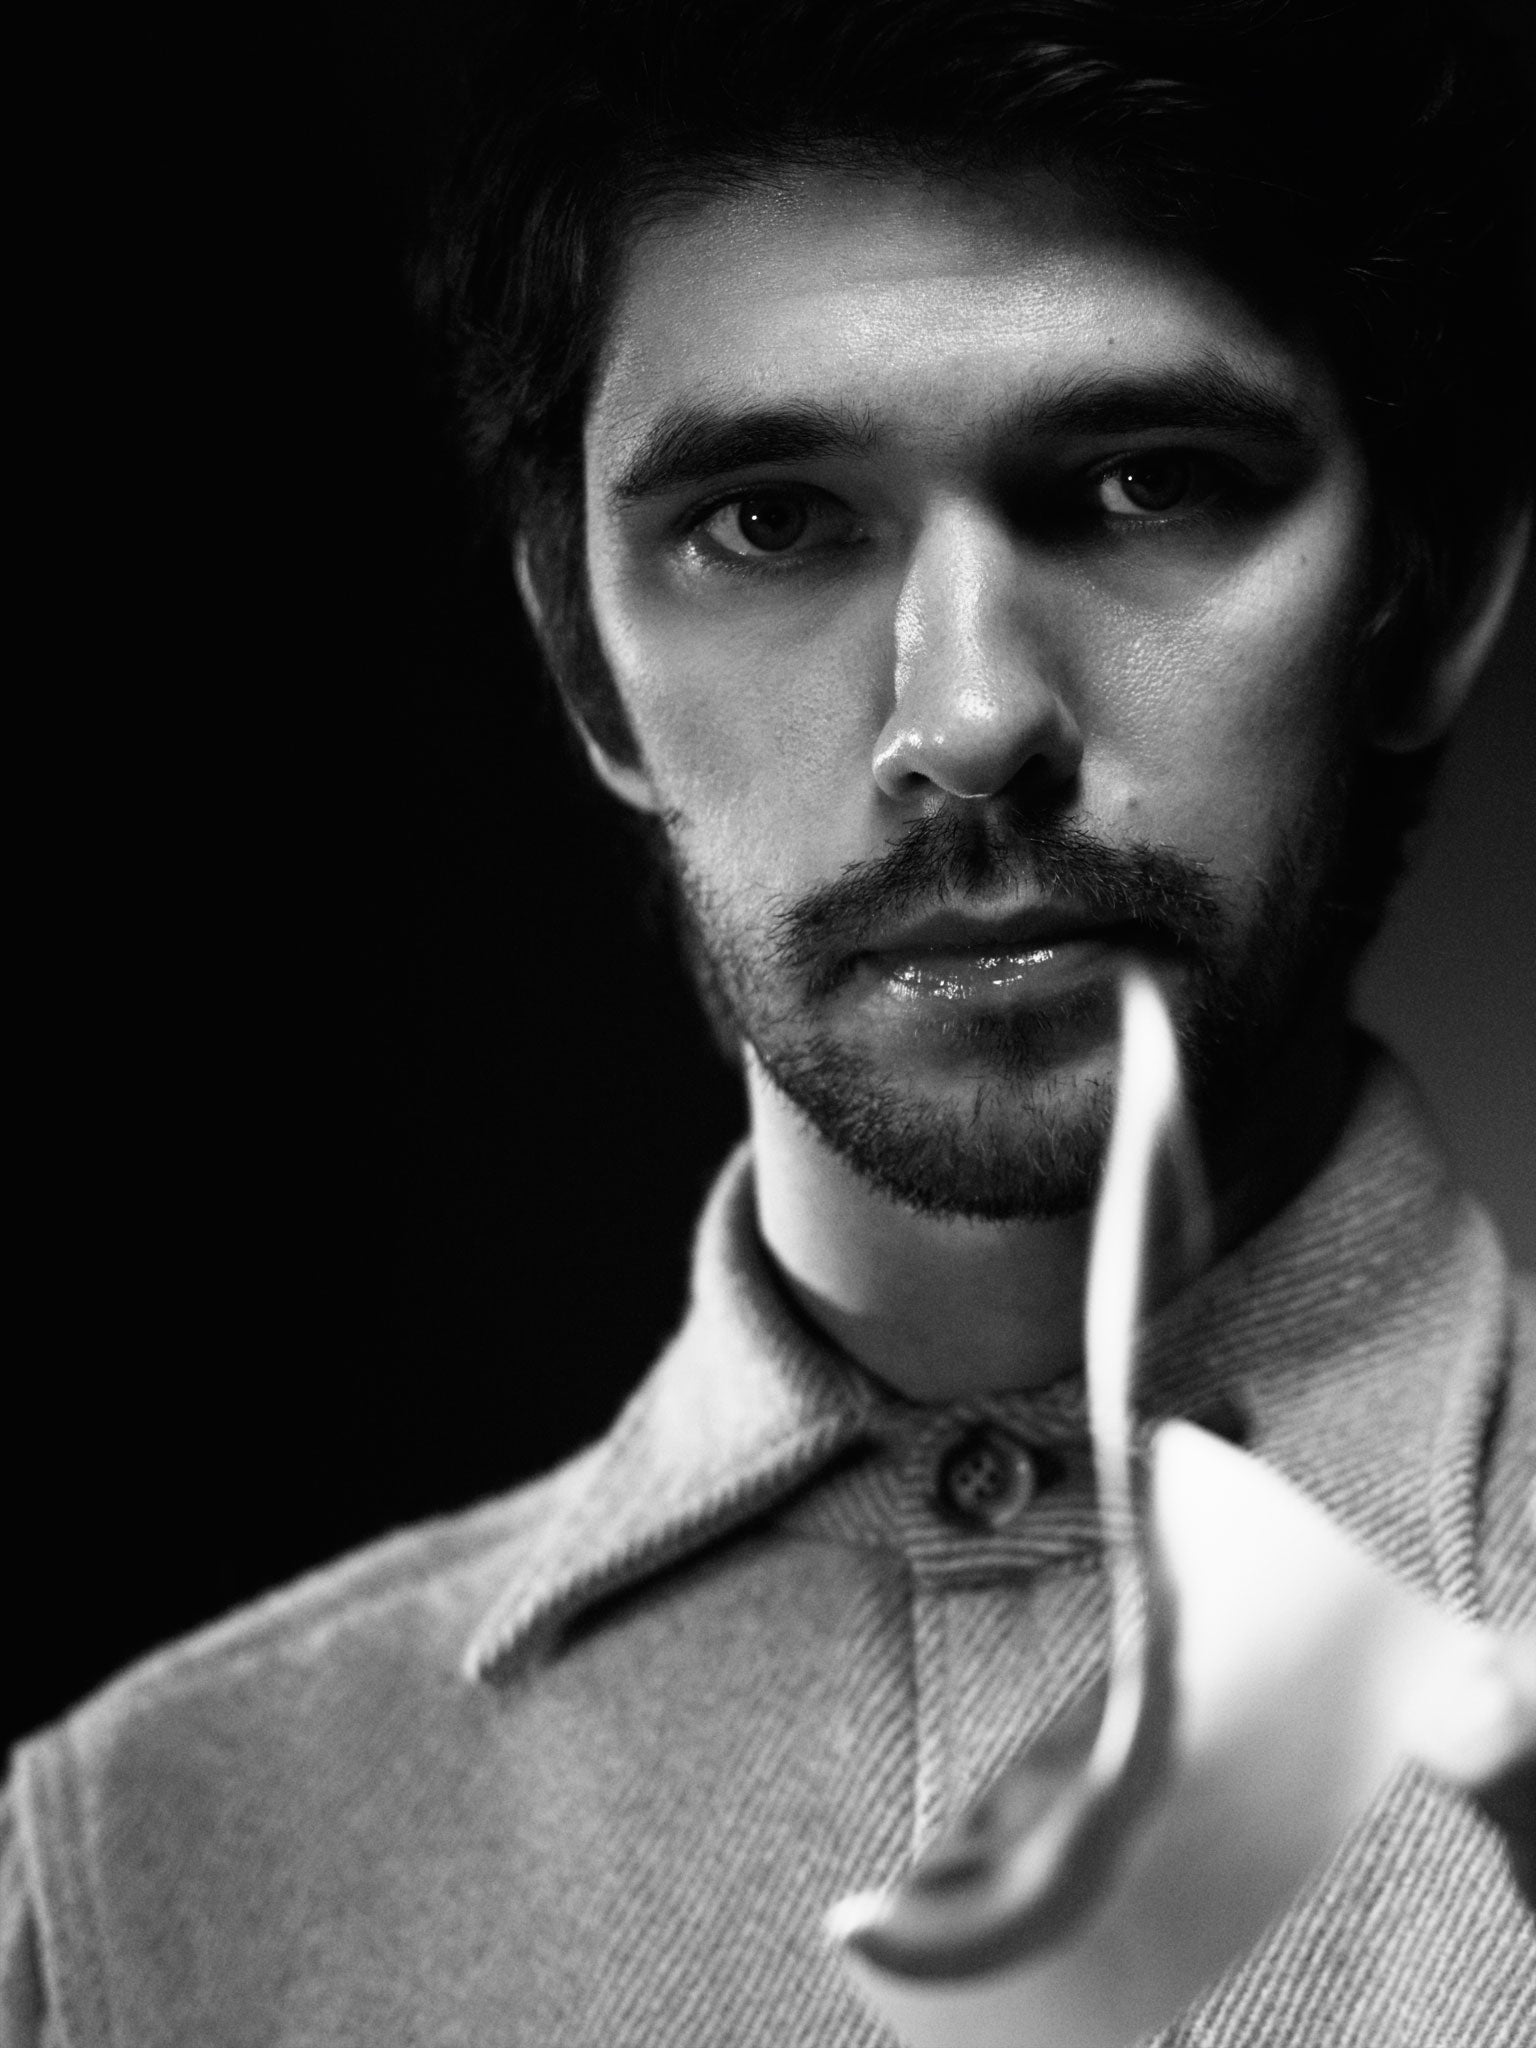 Ben Whishaw: I loved researching John Keats - I loved having an excuse to sit and read those poems for weeks on end